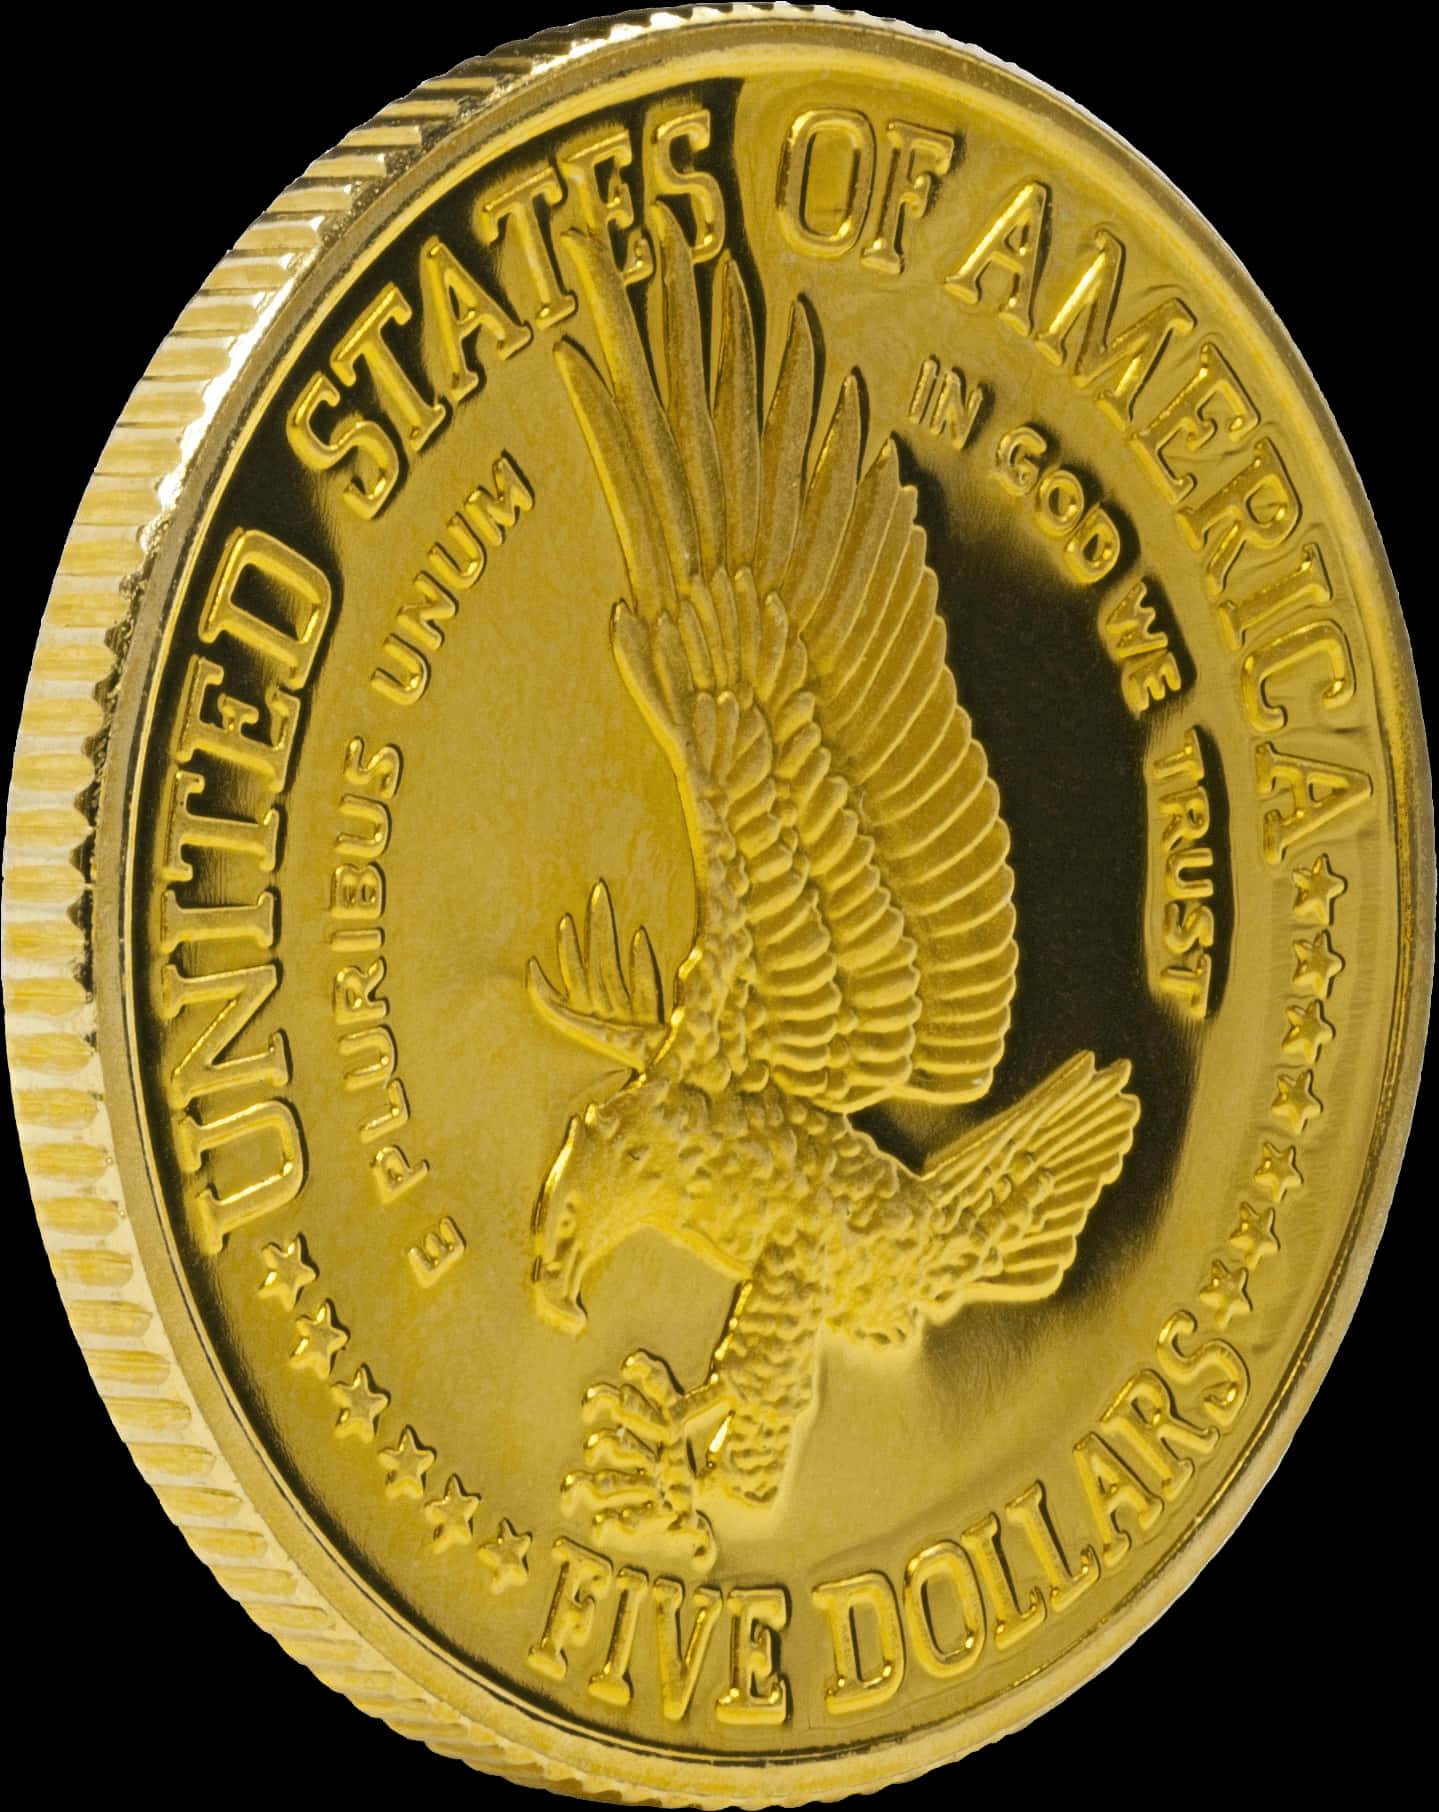 A Gold Coin With A Eagle On It